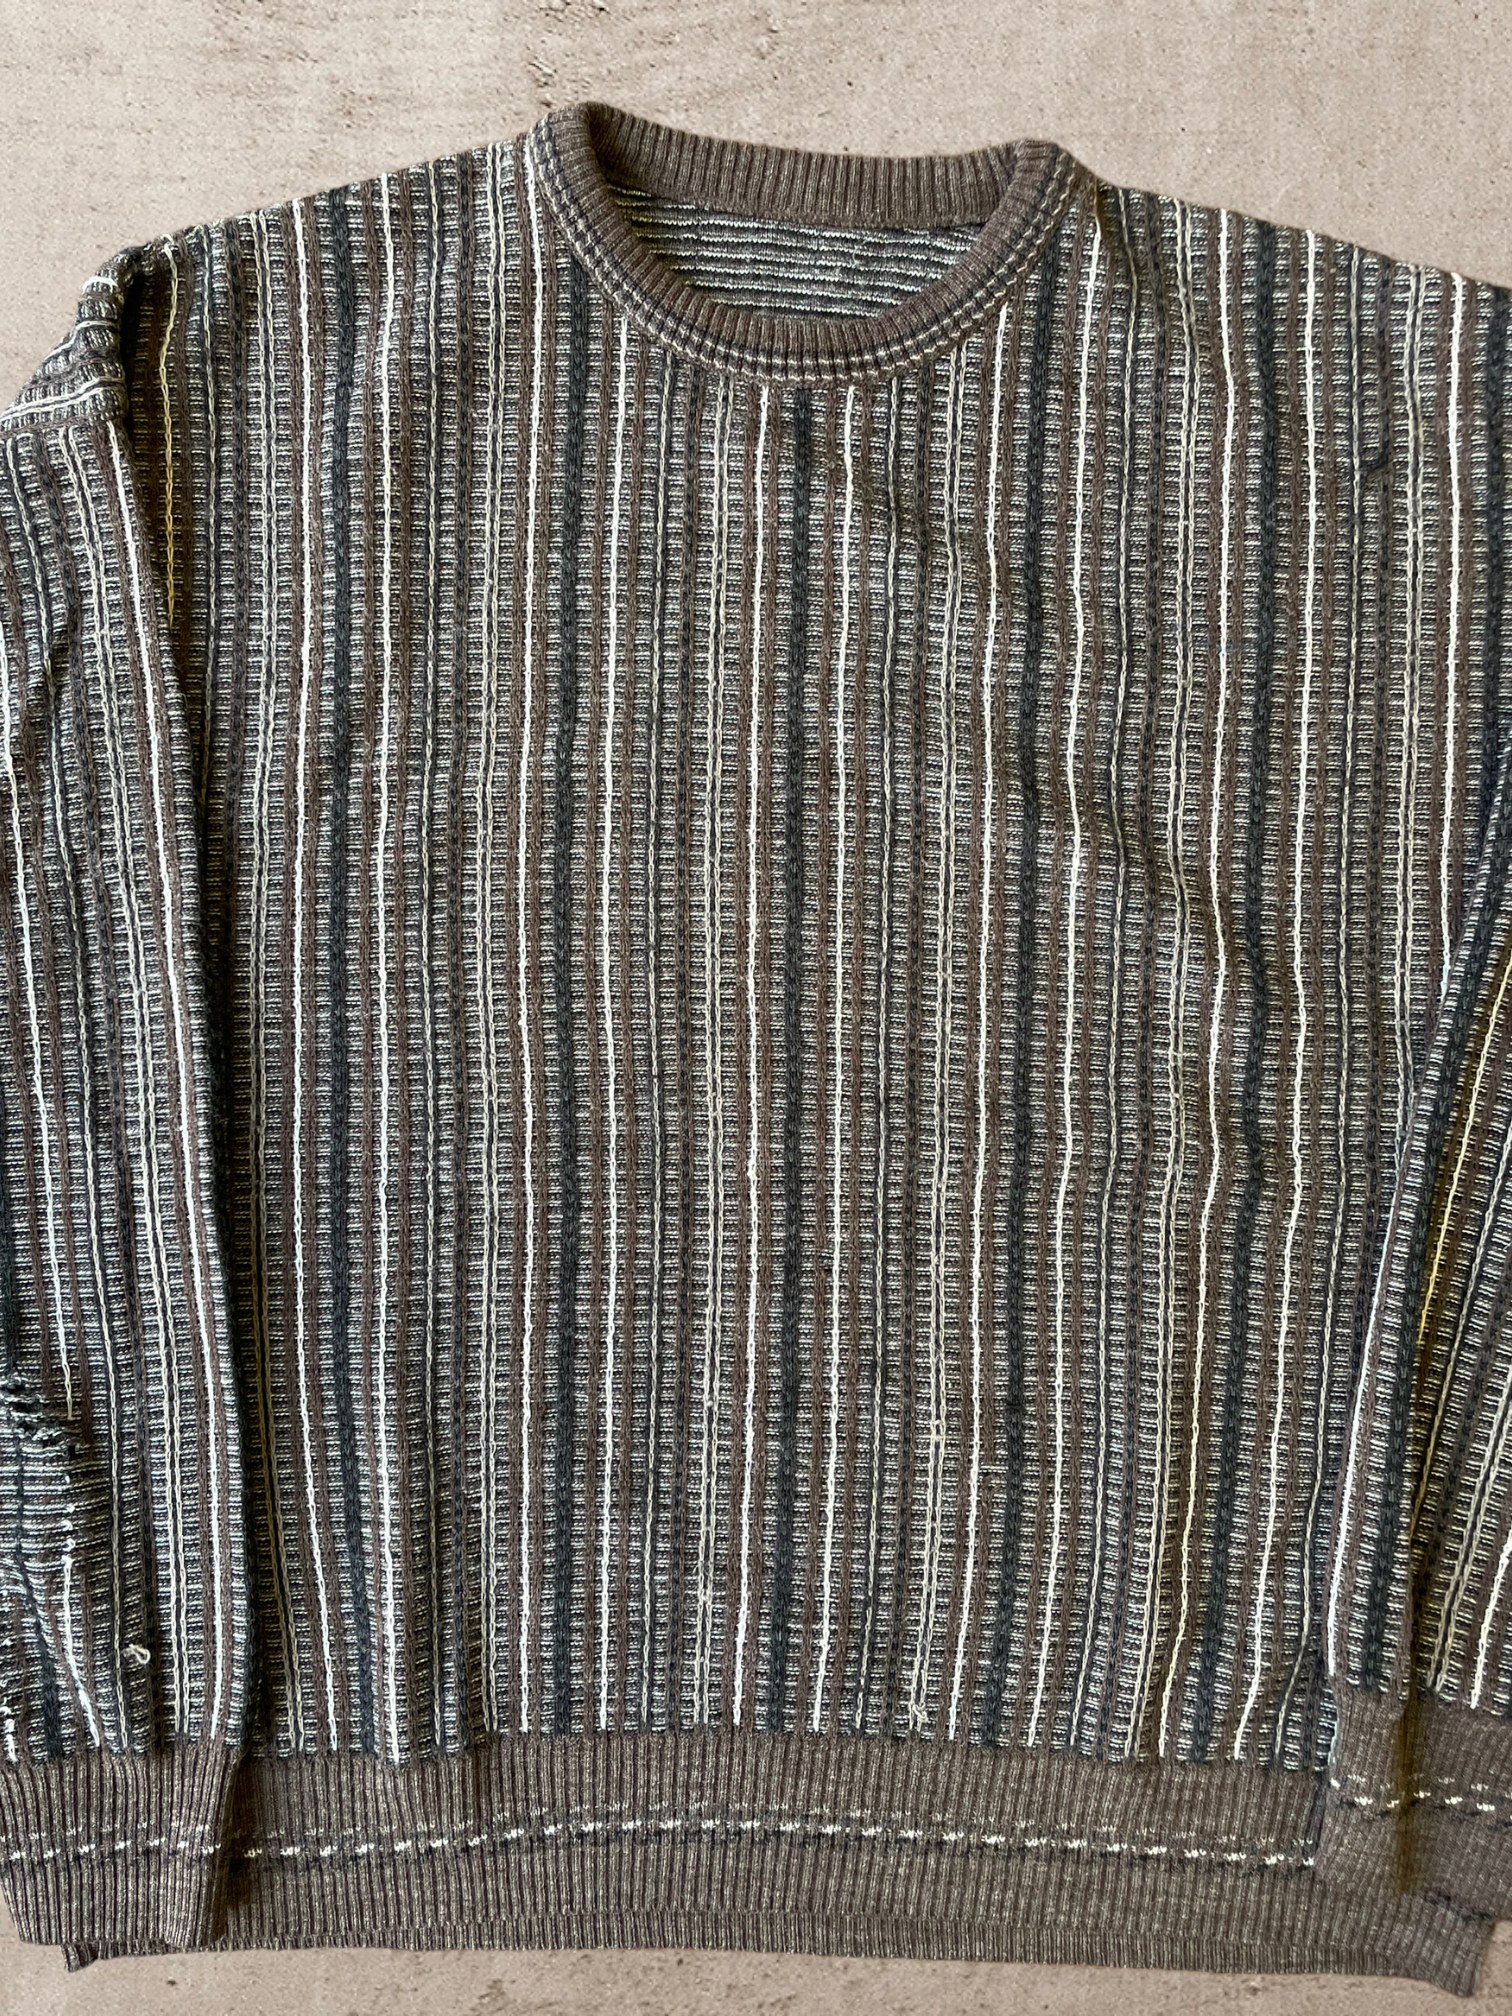 90s Stripped Knit Sweater - Large